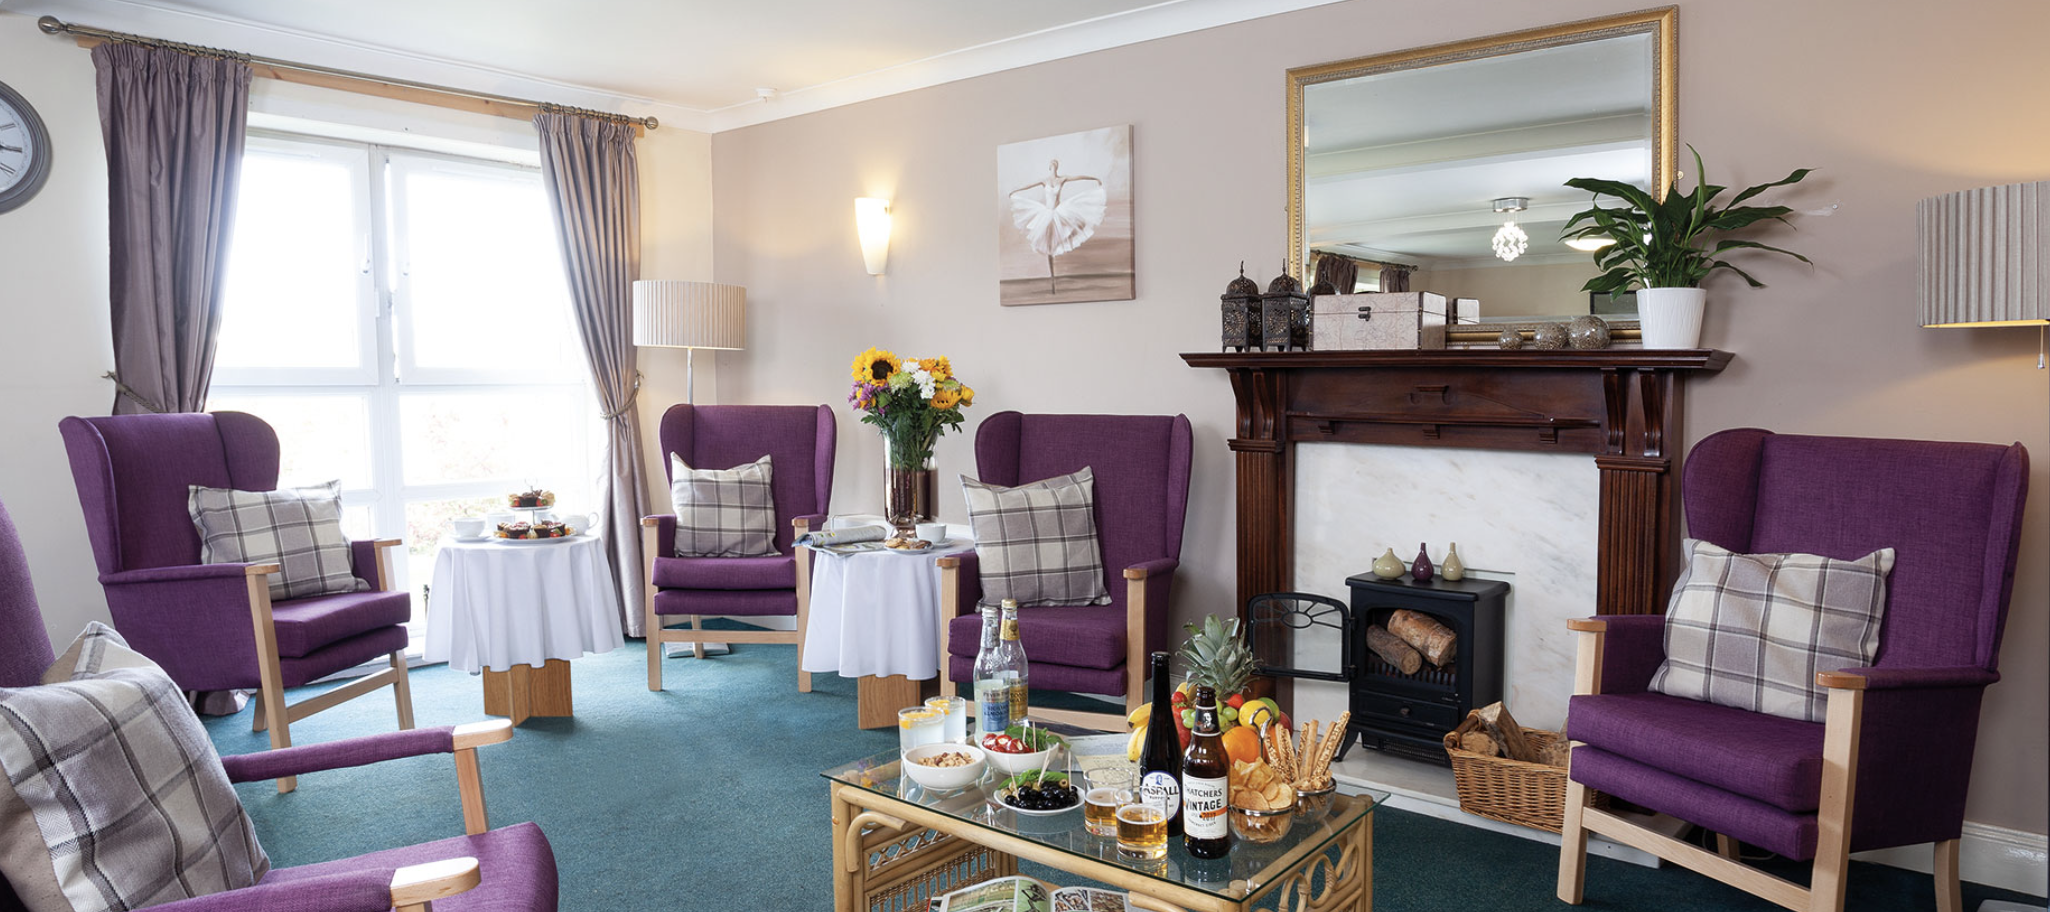 Communal Lounge of Abbey Lodge Care Home in Glasgow, Scotland